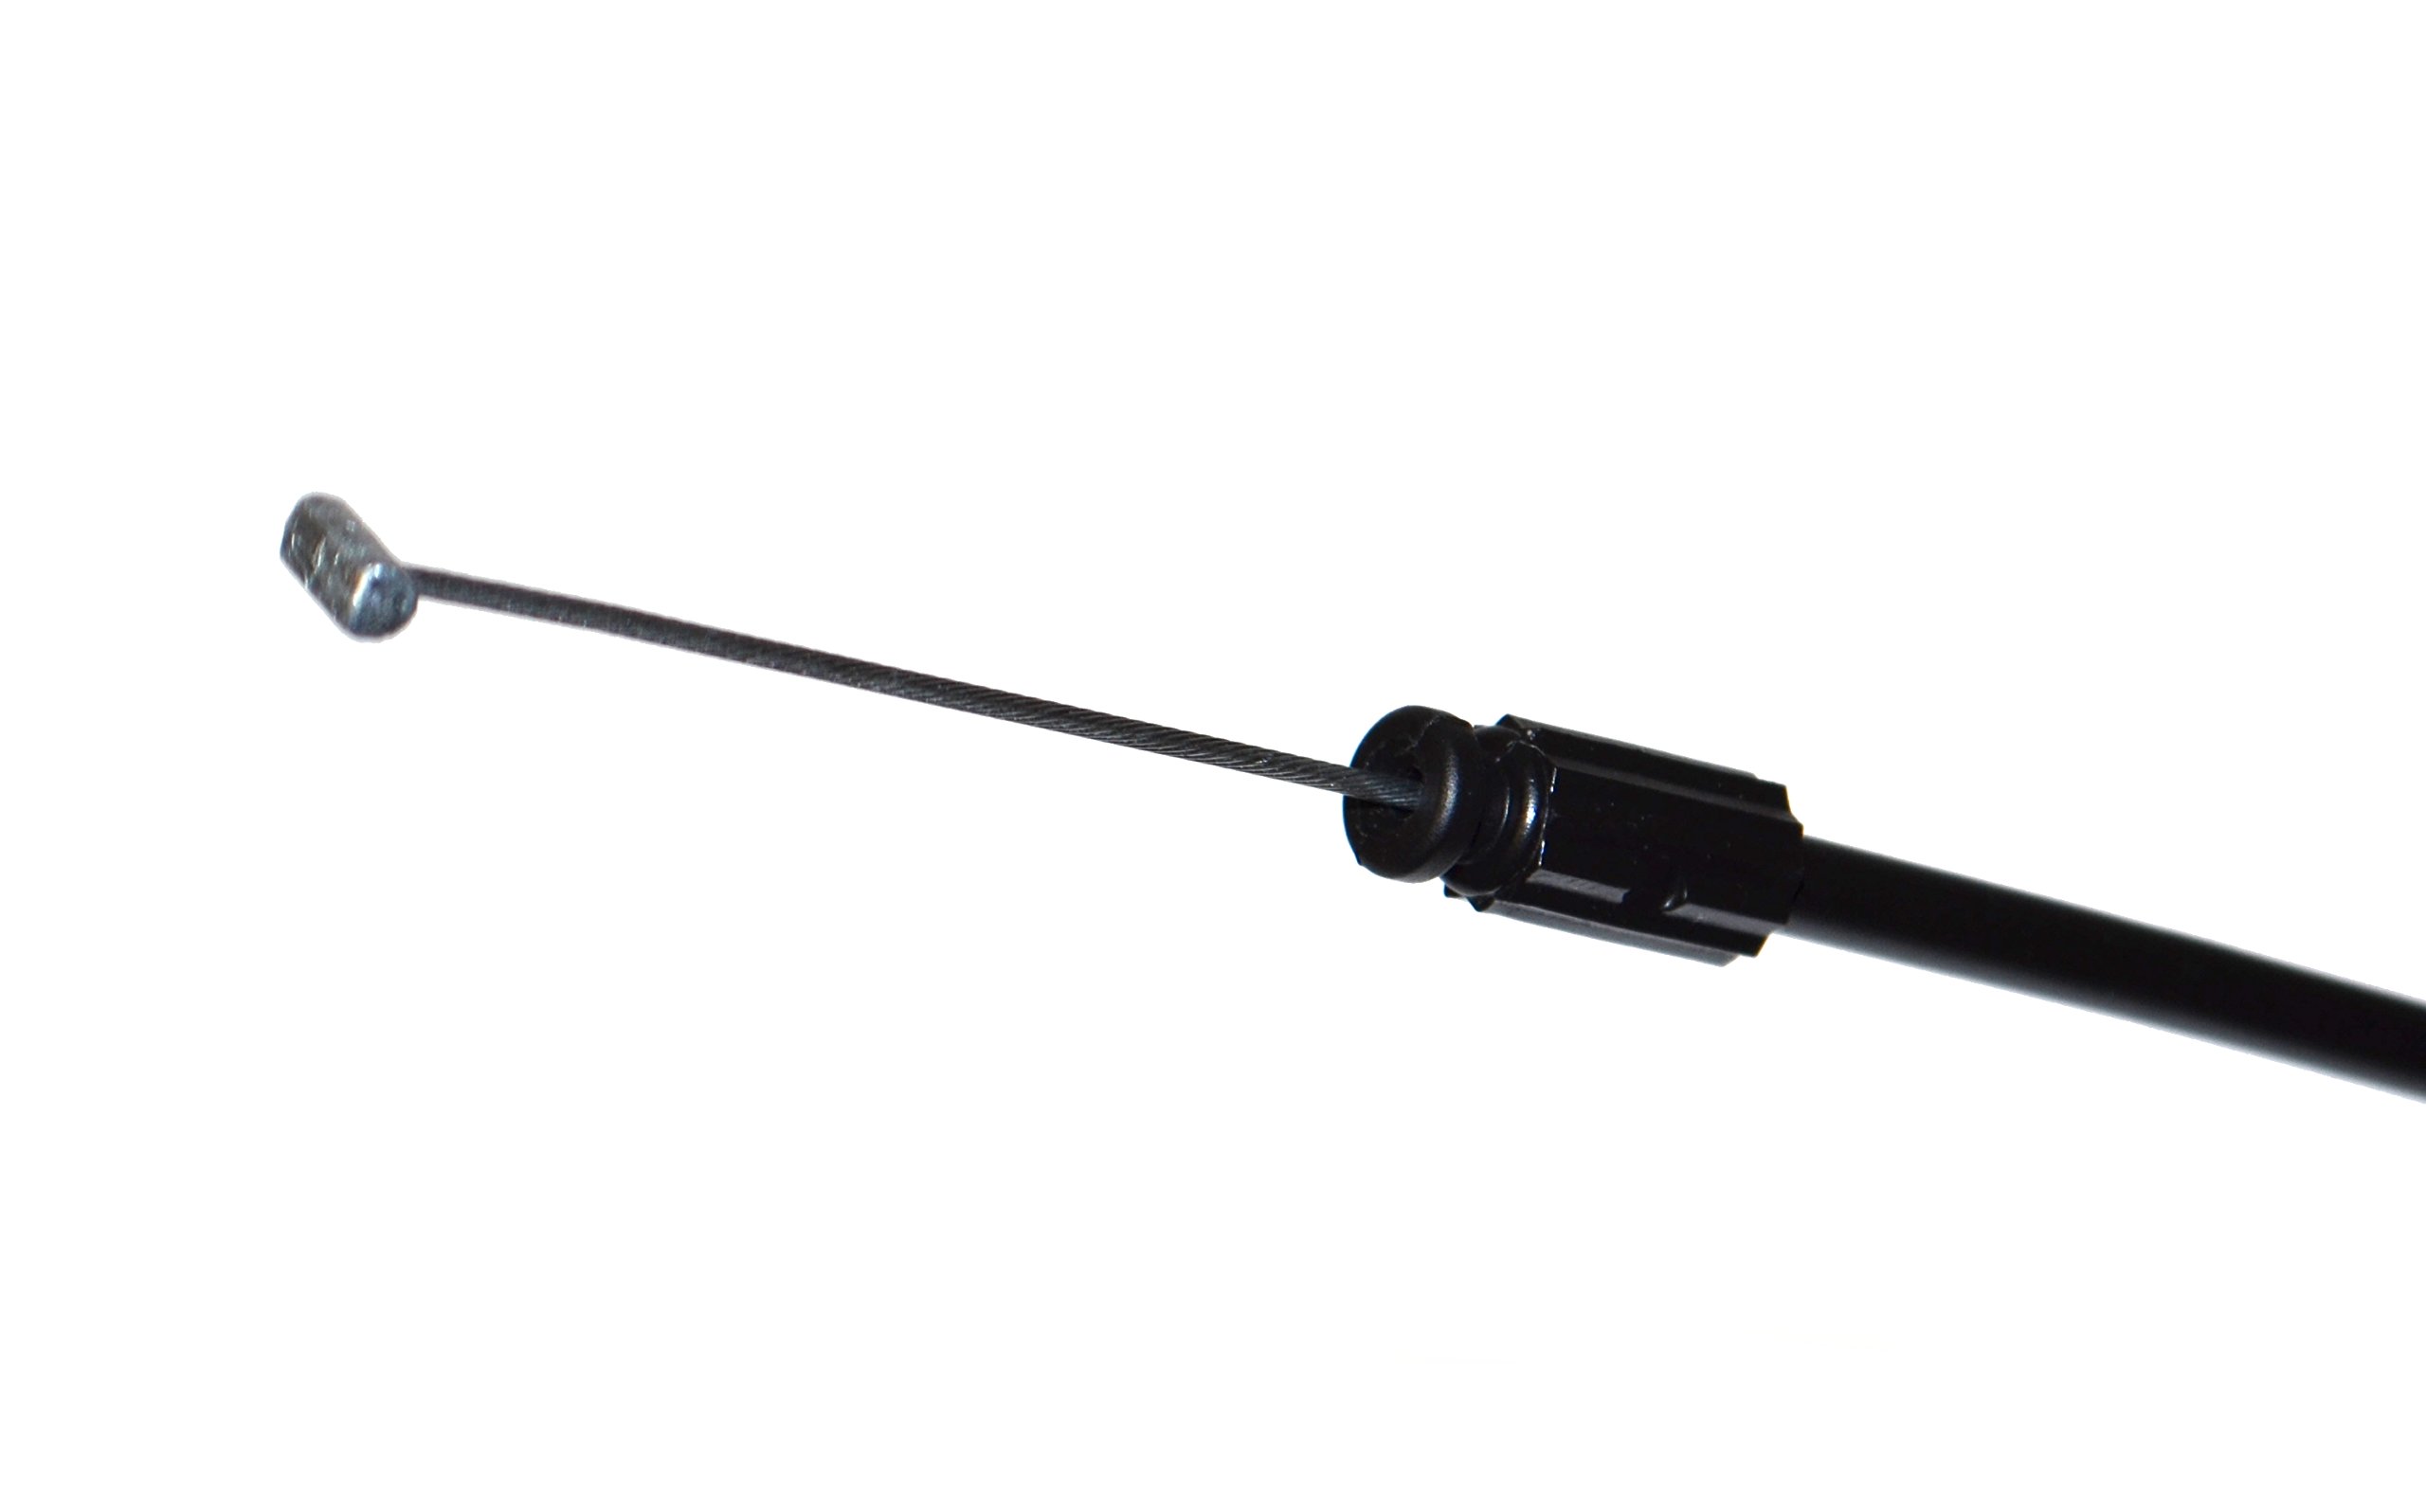 Recliner-Handles Replacement Cable 2 1/8" Exposed Wire, 3mm Barrel-Tip, 6mm Barrel, 38" Overall Length